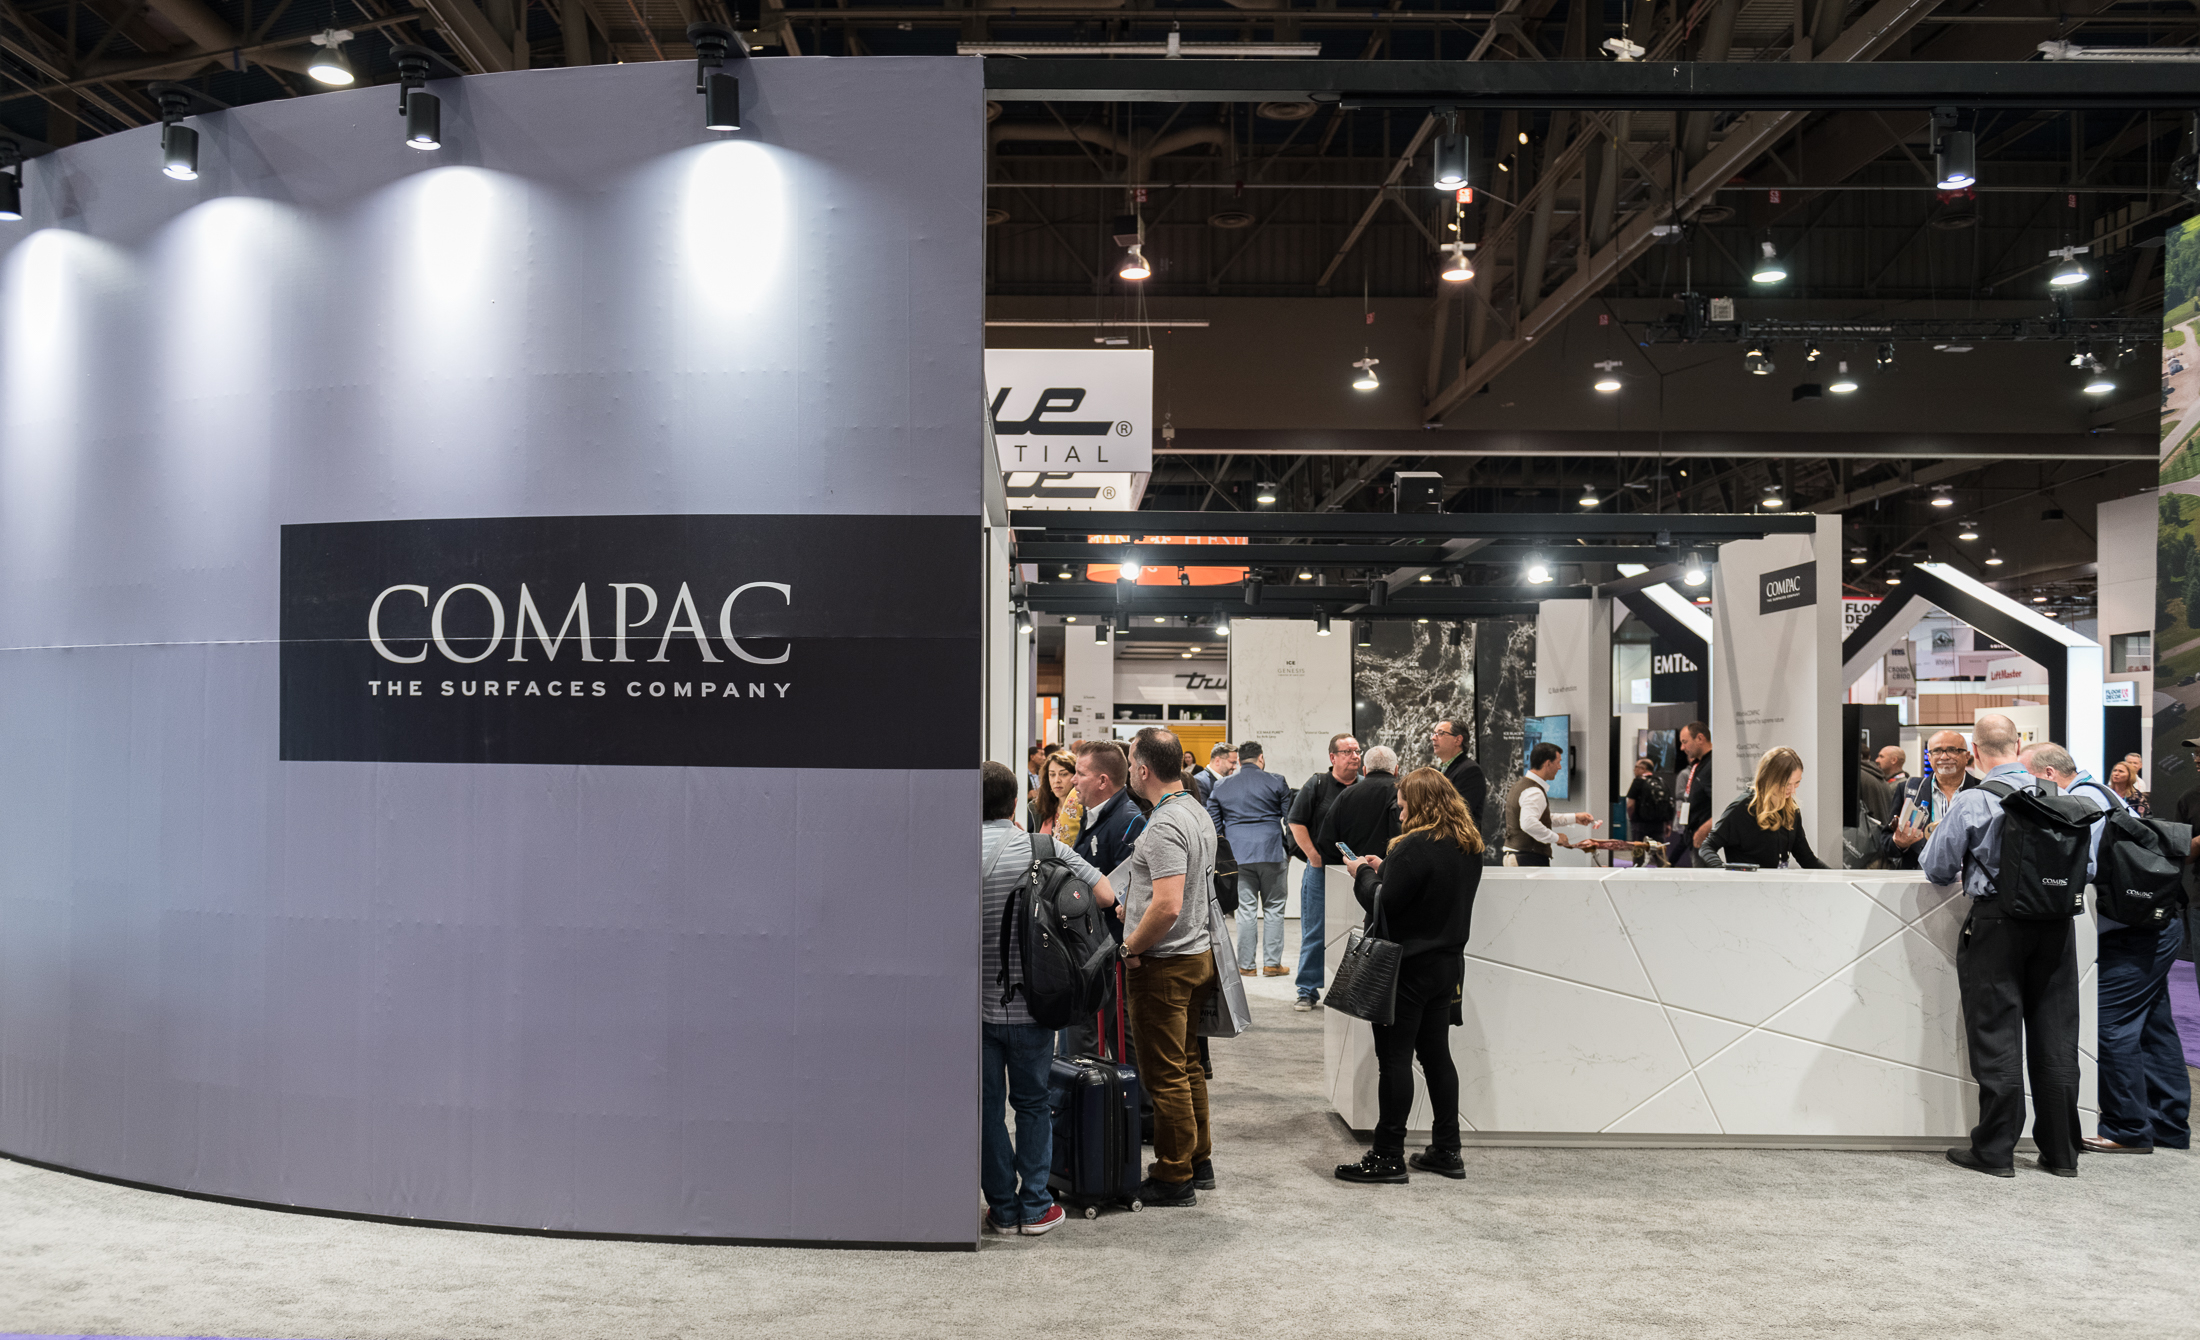 COMPAC has a 400 square meter stand at KBIS 2020.